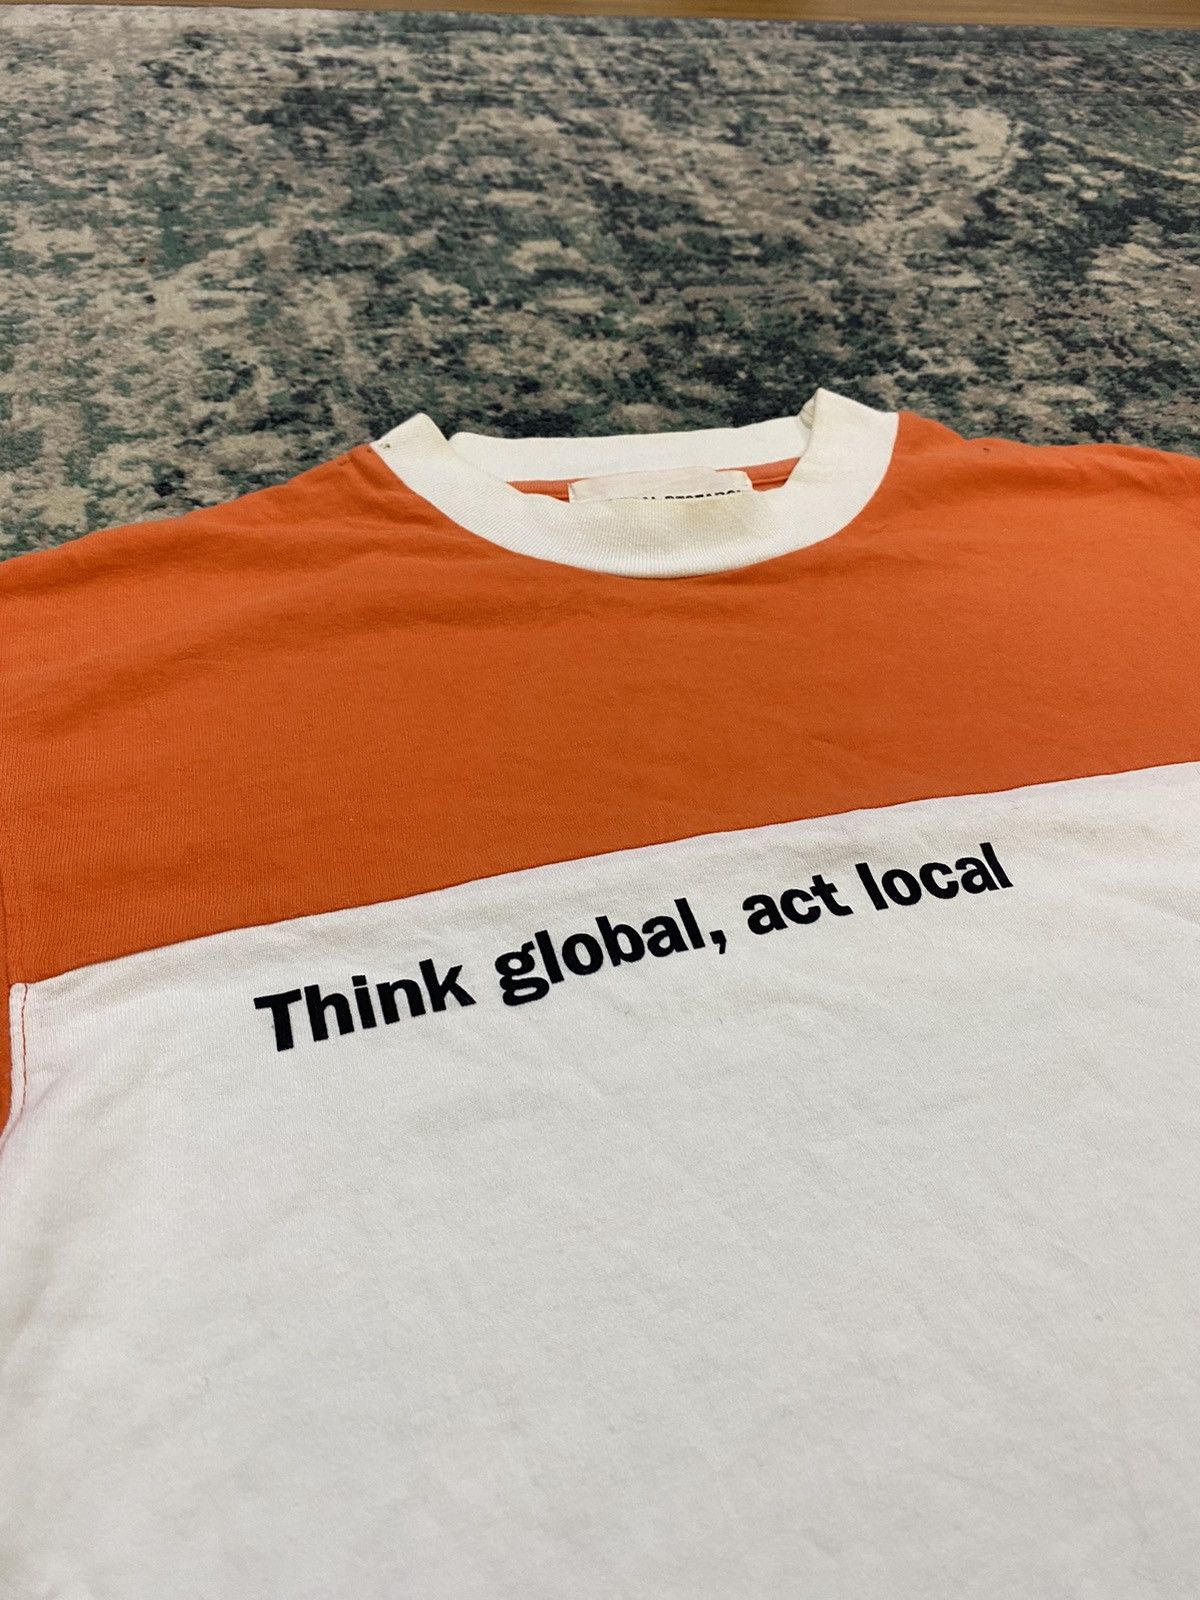 SS00 "Think Global, Act Local" Tee - 5